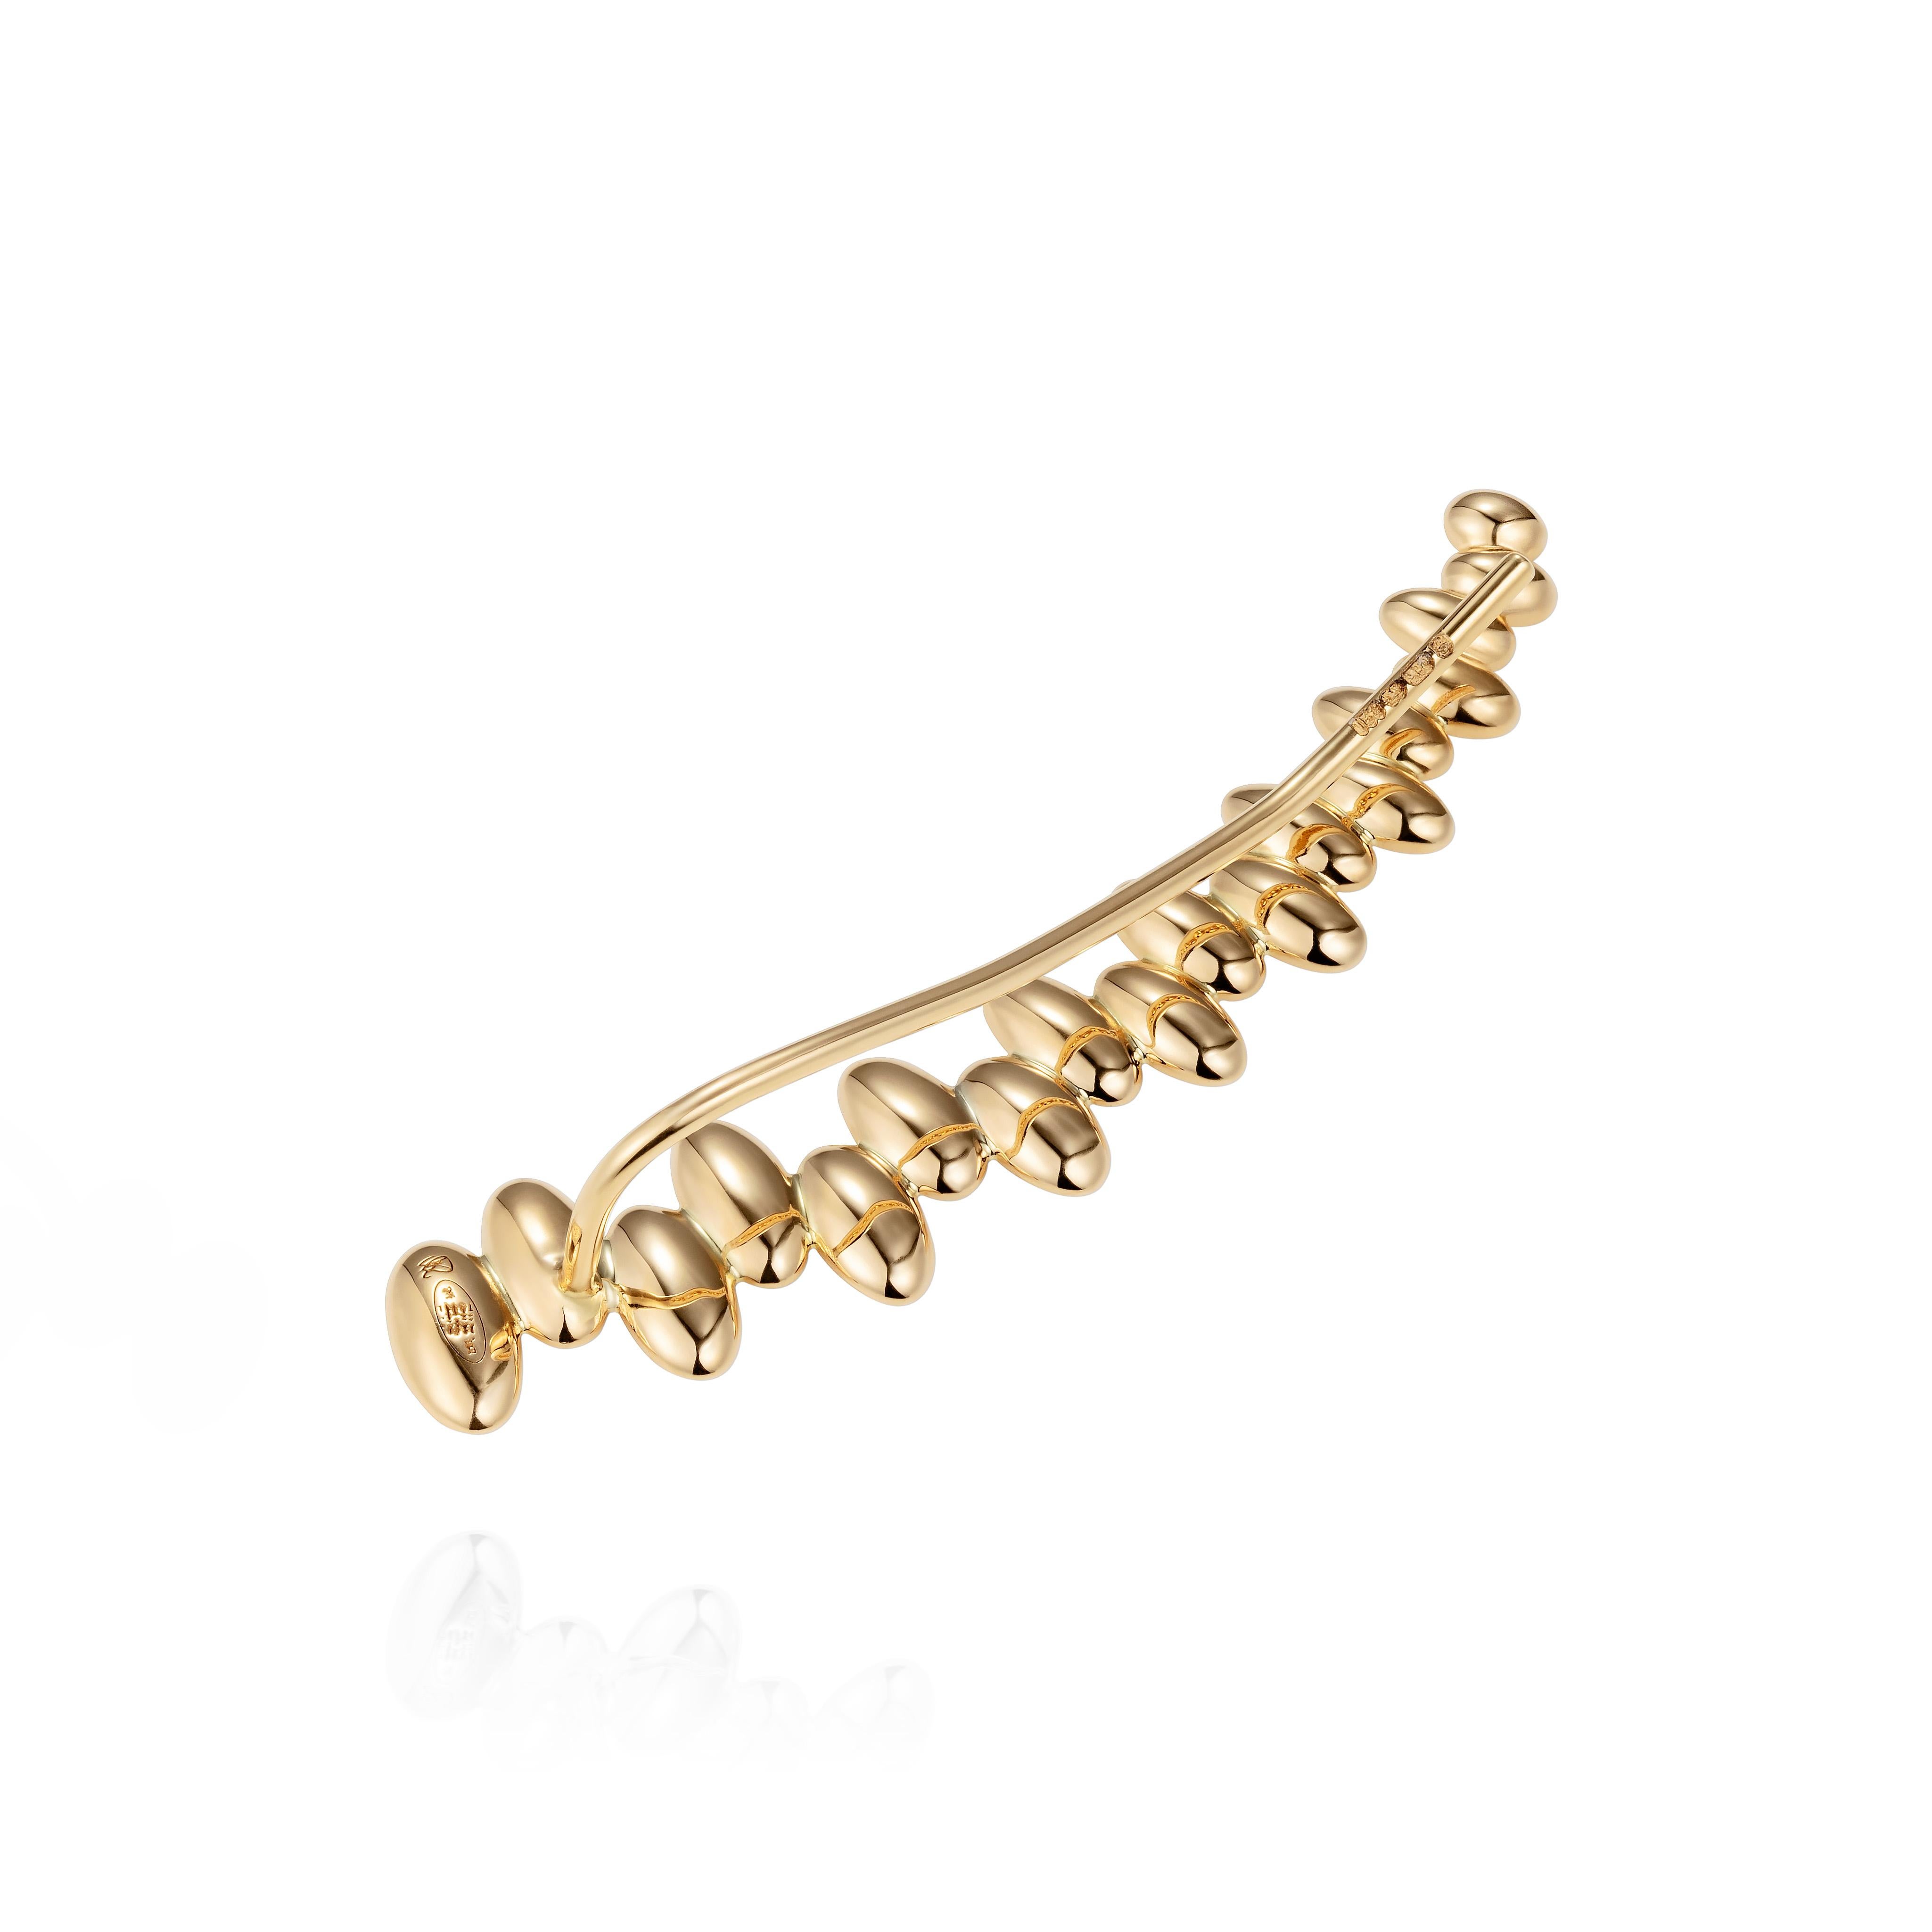 18 Karat Yellow Gold Ear Cuff Earring Set With Diamonds

This 18 karat yellow gold and diamond ear cuff is part of the Skinny collection. It is a statement piece and a must have accessory. The average gold weight 2.8 grams. Diamonds weight